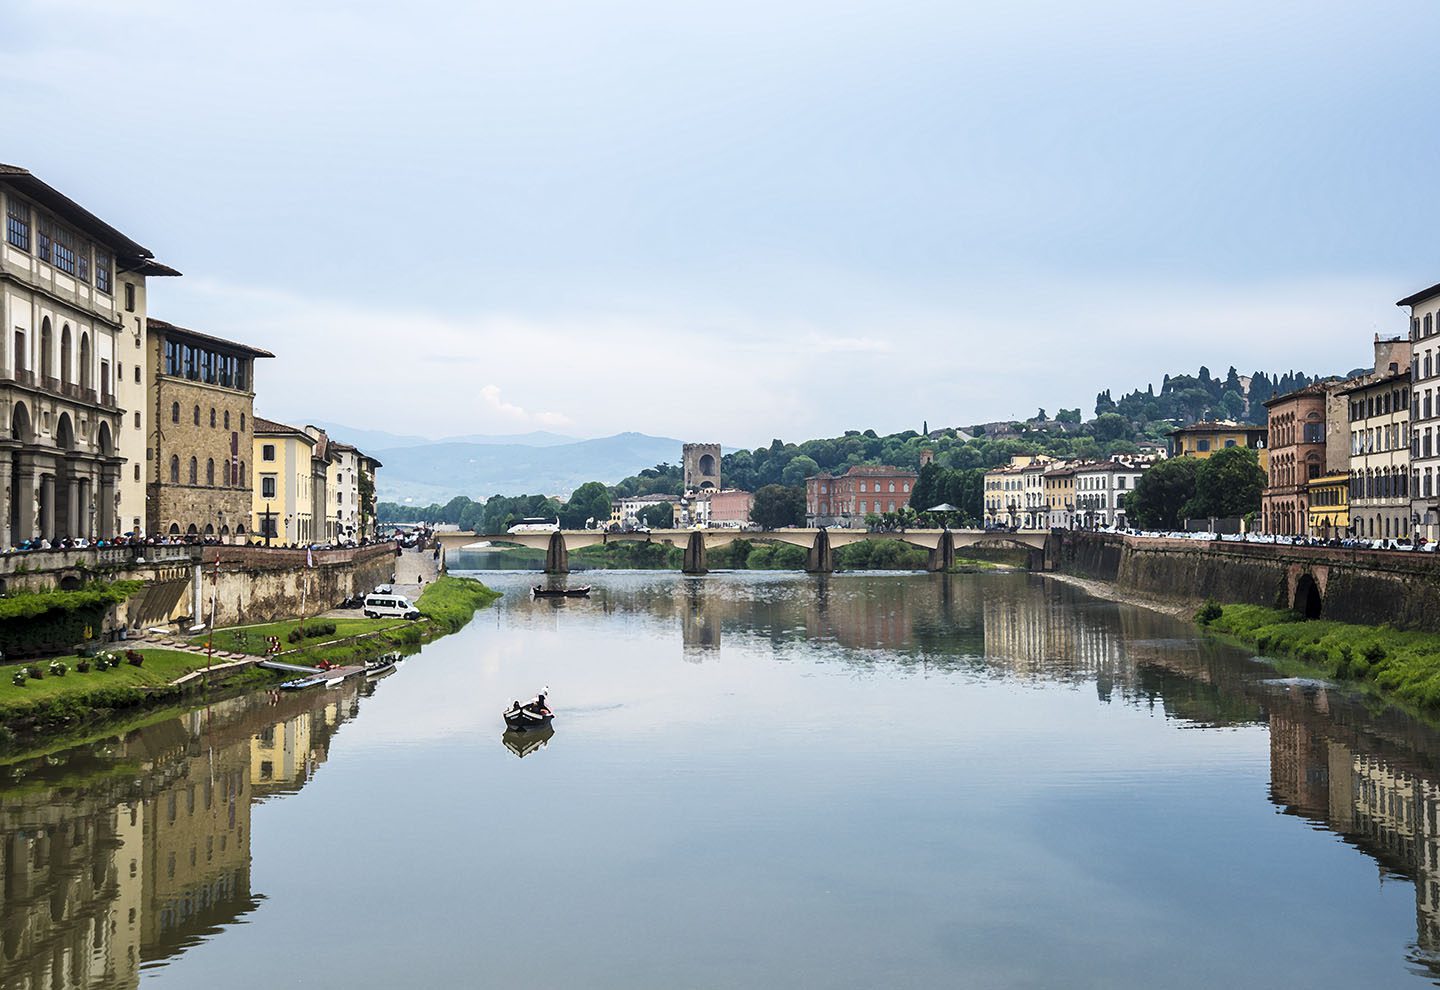 The Arno River, Florence, Italy